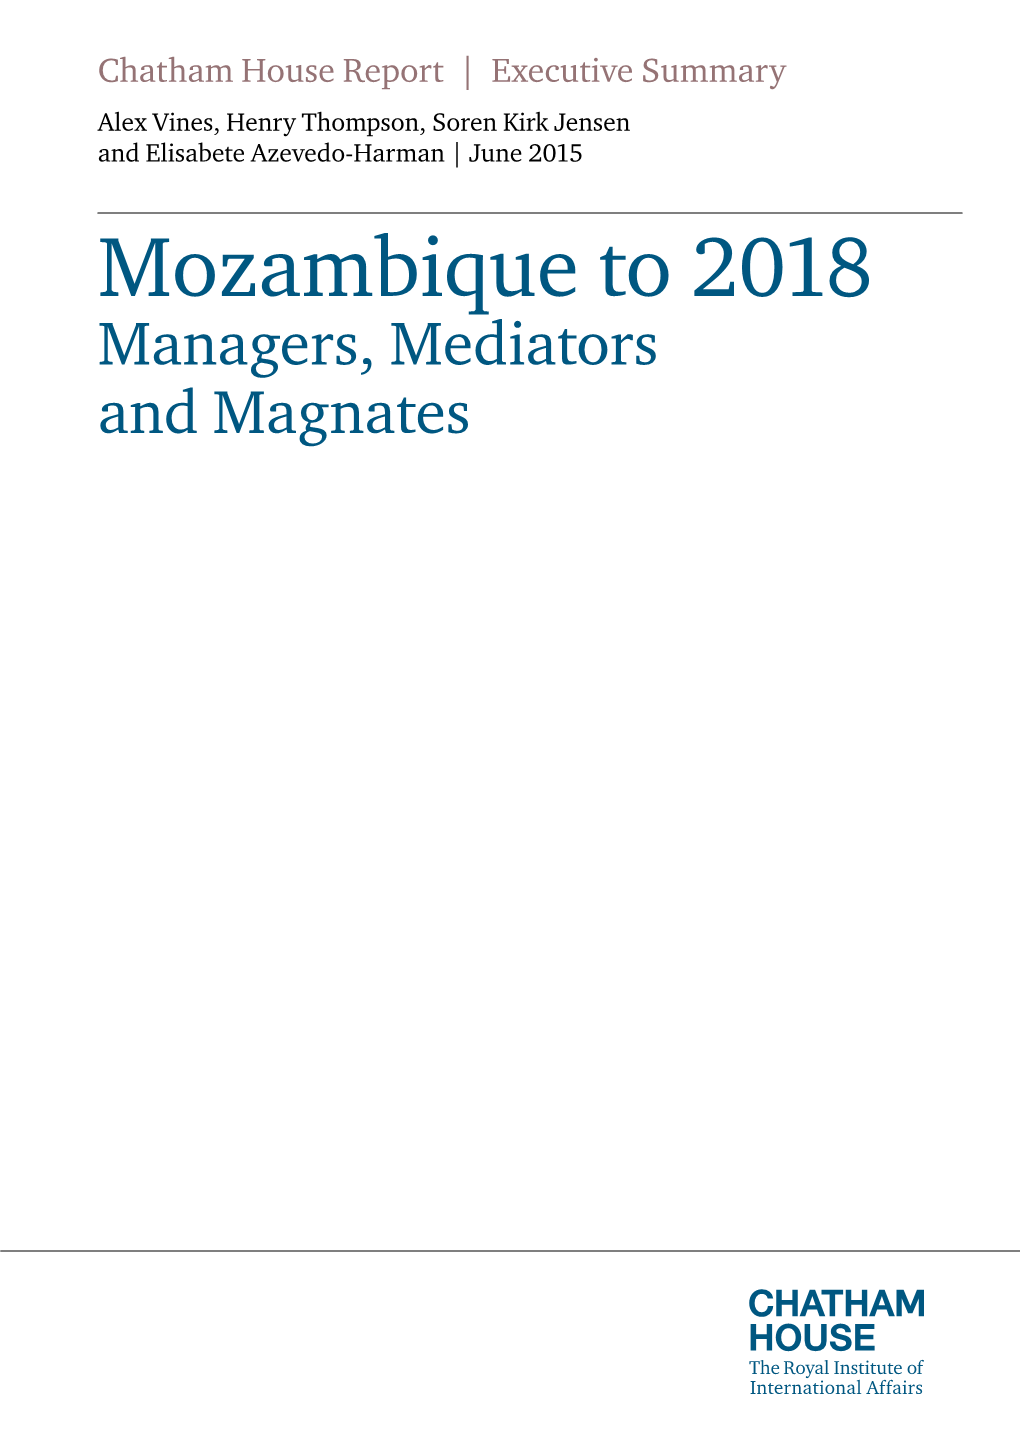 Mozambique to 2018 Managers, Mediators and Magnates Executive Summary and Recommendations